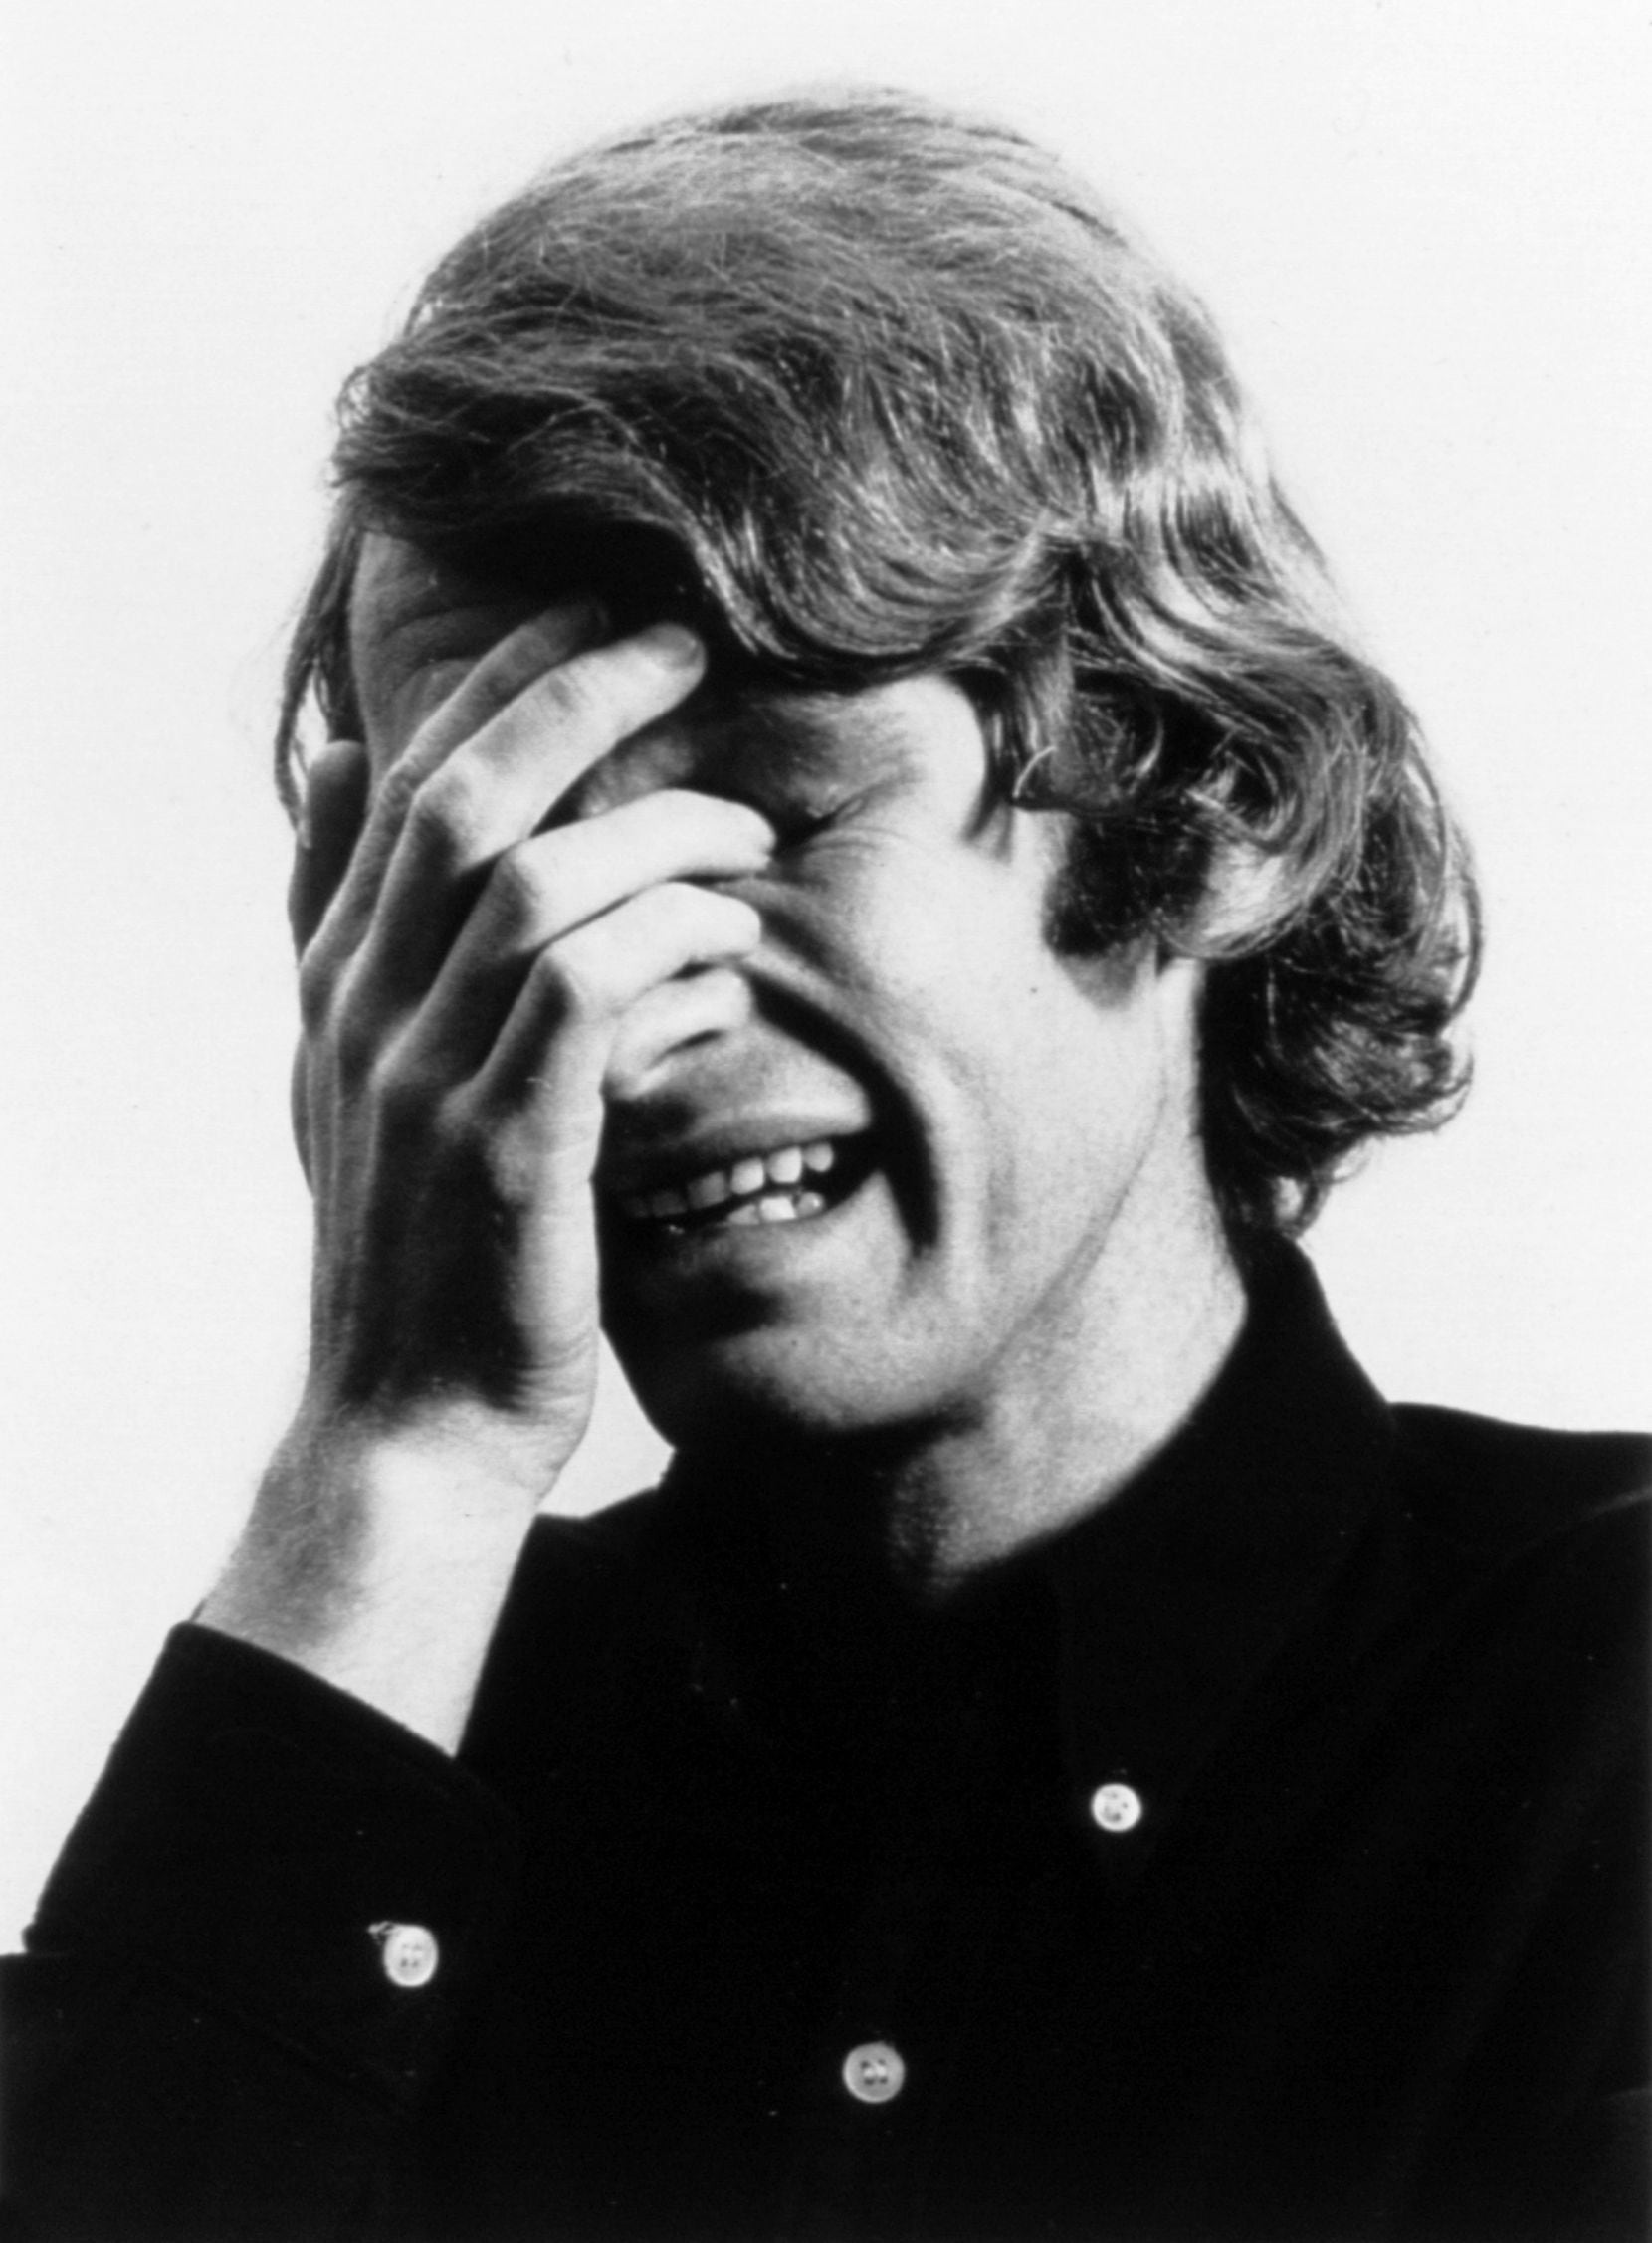 Bas Jan Ader’s "I’m Too Sad to Tell You," a 1971 short film, features the artist's face,...